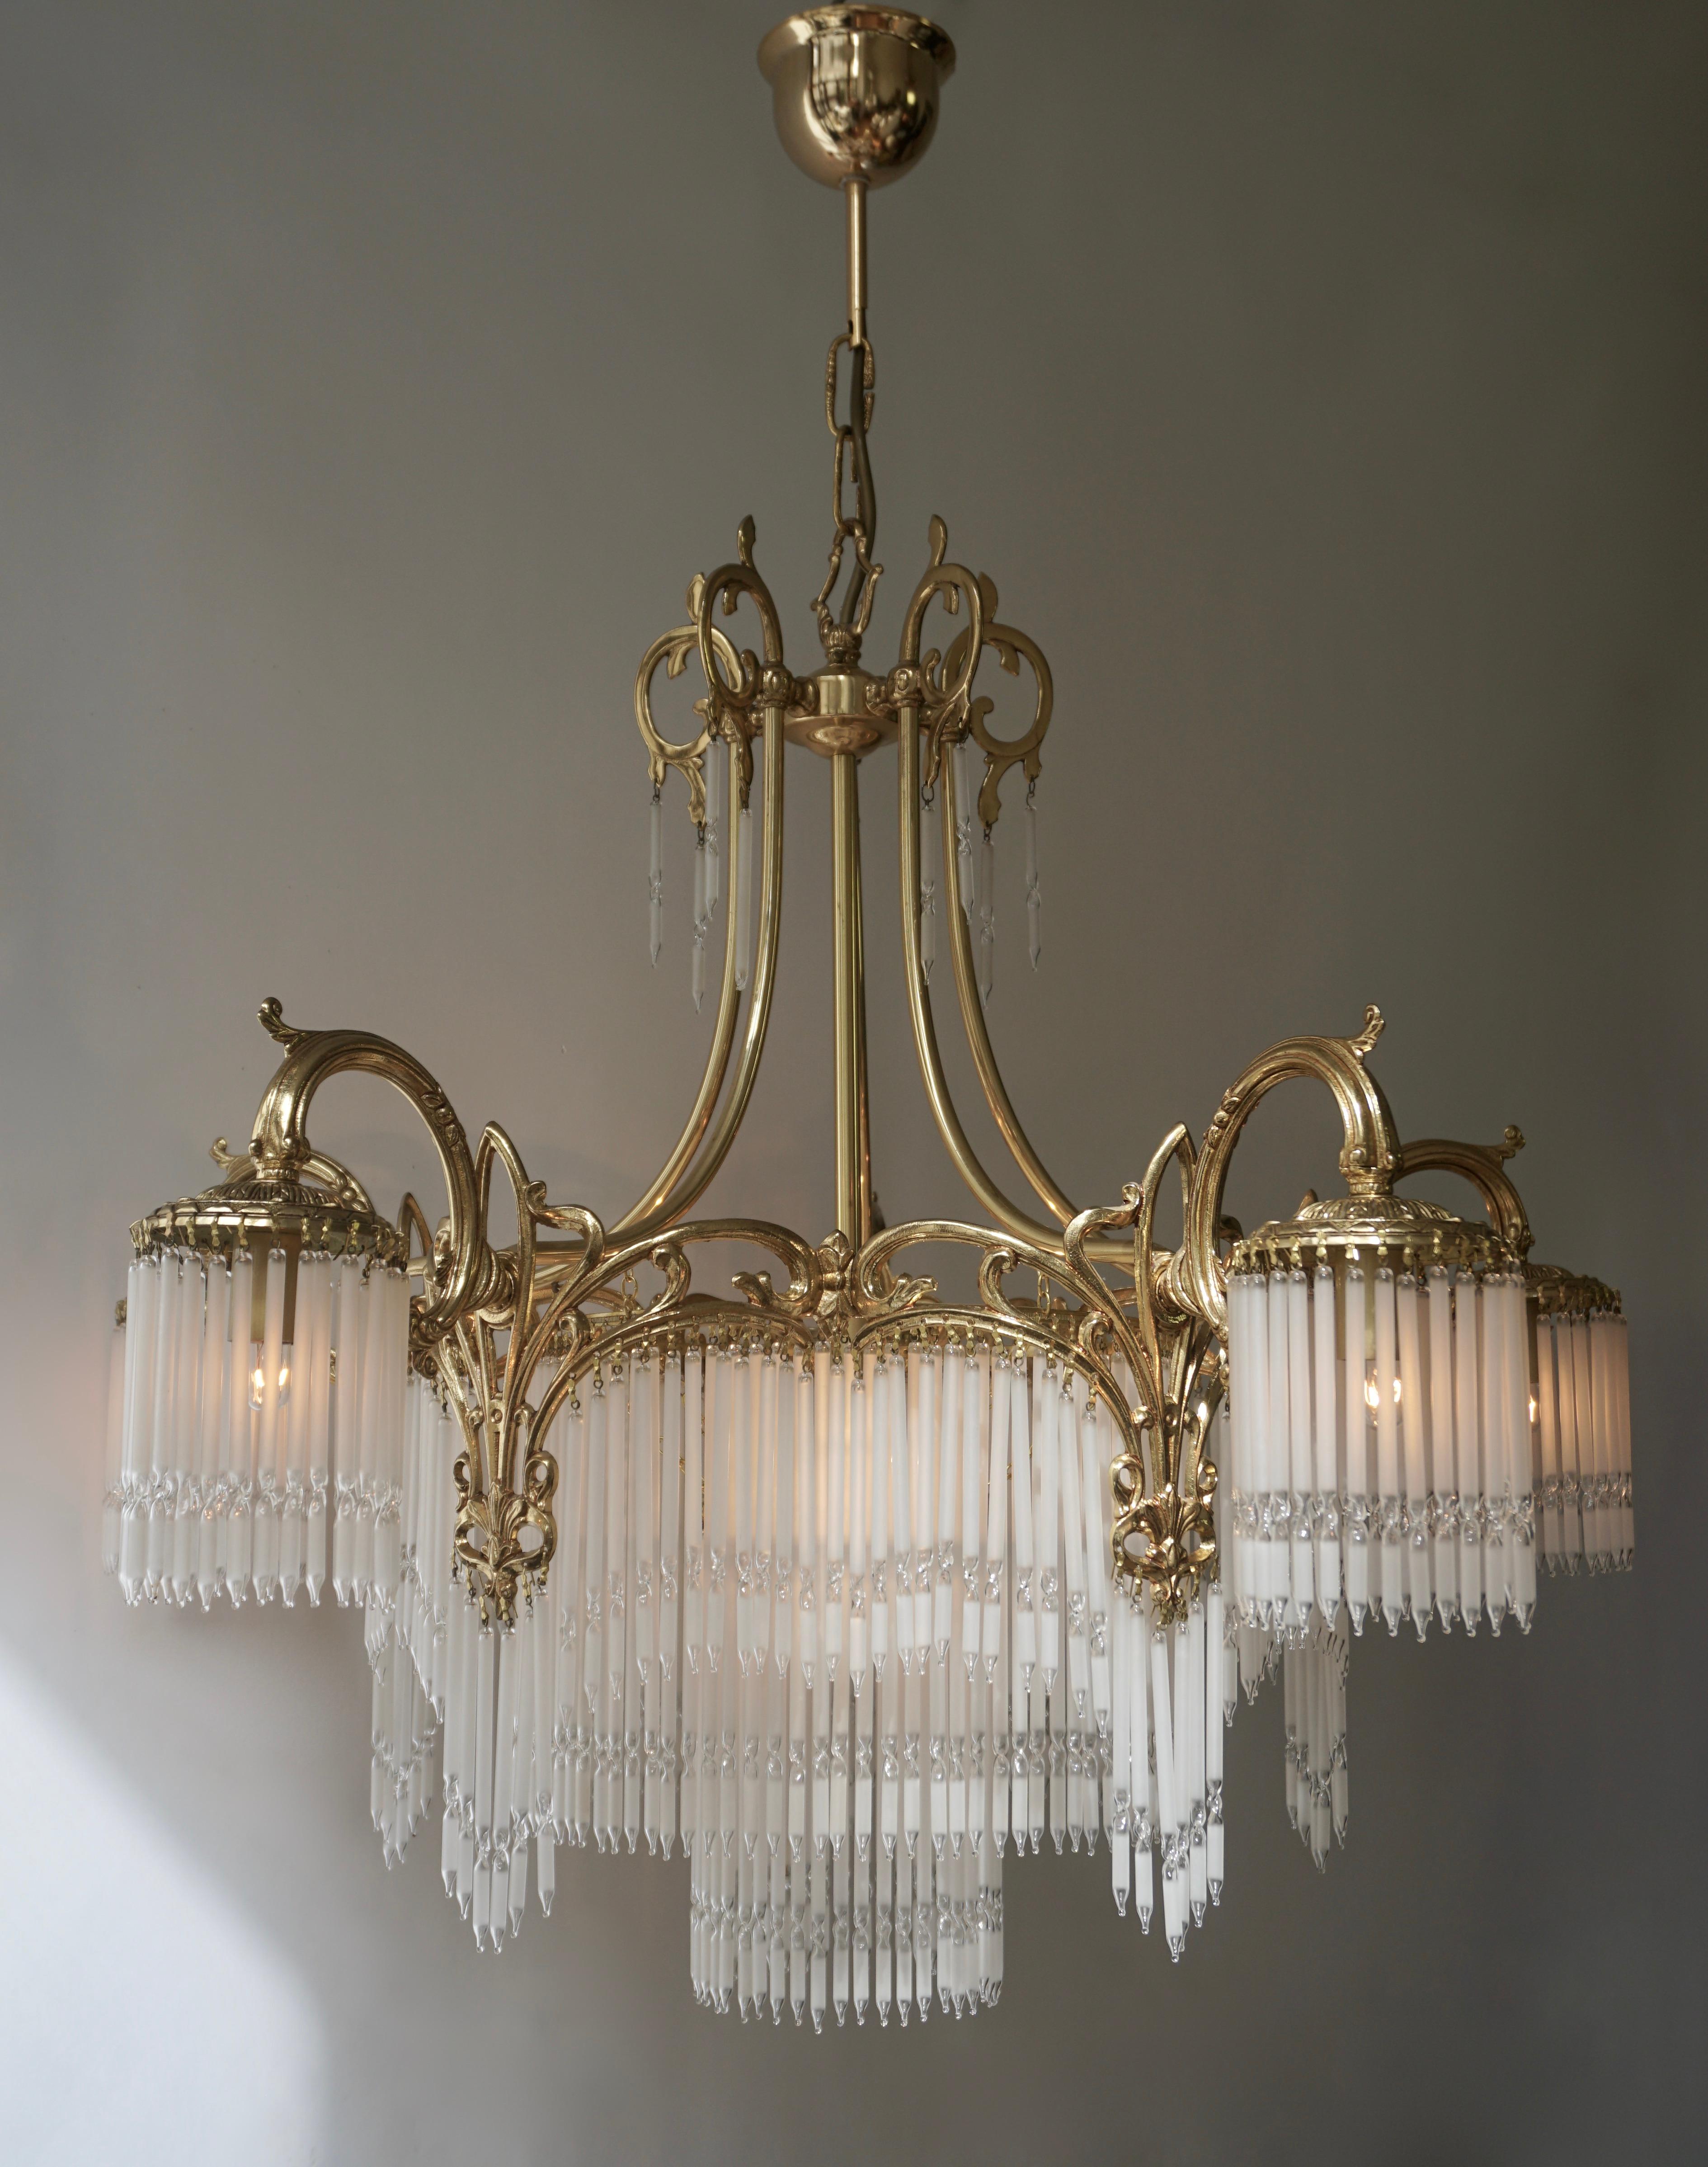 Italian Large French Art Nouveau & Art Deco Brass and Glass Rods Chandelier